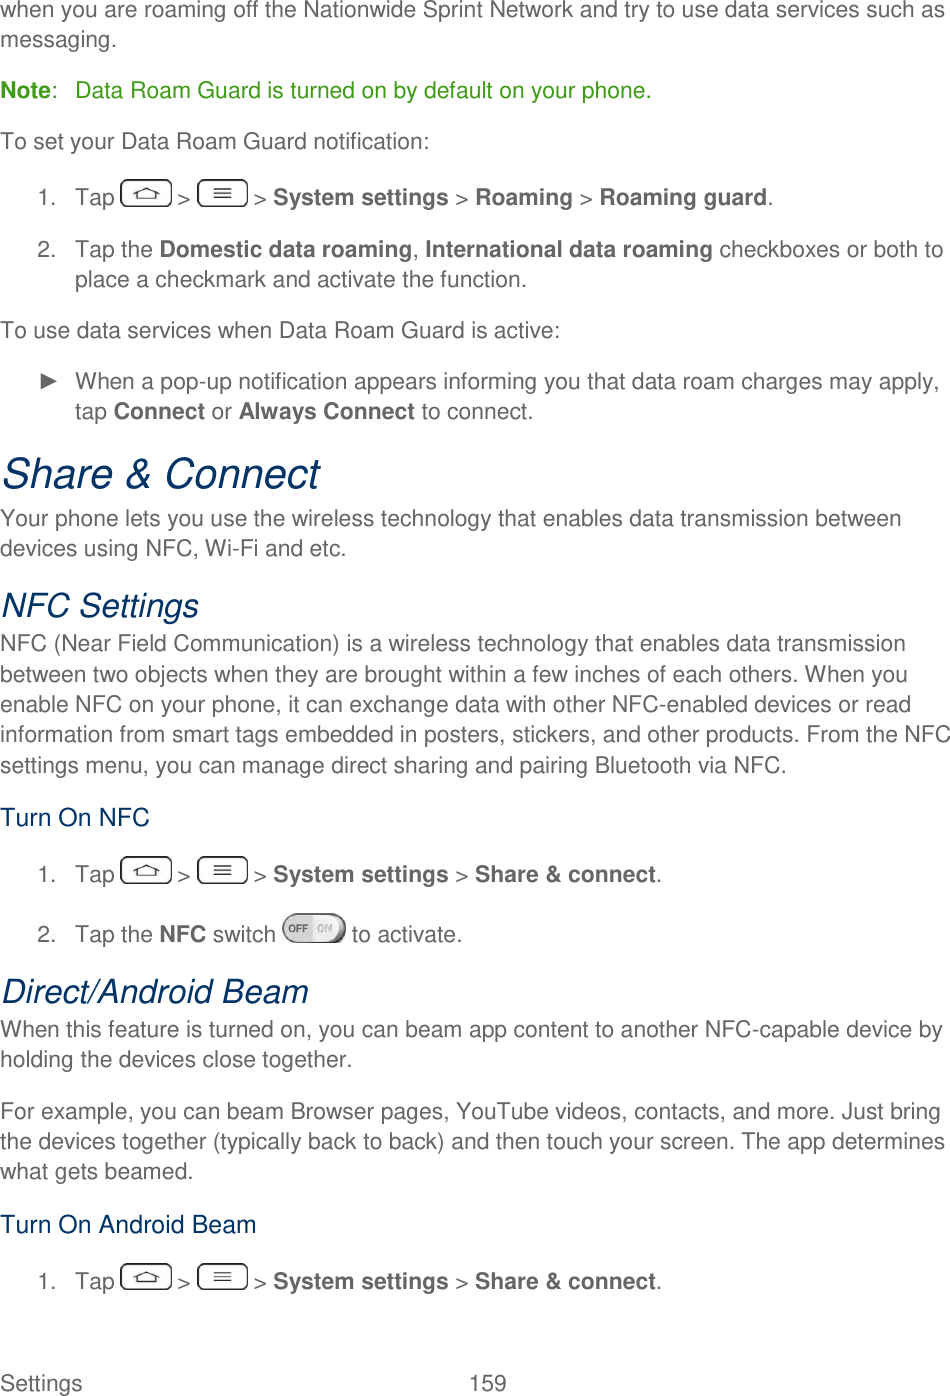  Settings  159   when you are roaming off the Nationwide Sprint Network and try to use data services such as messaging. Note:   Data Roam Guard is turned on by default on your phone. To set your Data Roam Guard notification: 1.  Tap   &gt;   &gt; System settings &gt; Roaming &gt; Roaming guard. 2.  Tap the Domestic data roaming, International data roaming checkboxes or both to place a checkmark and activate the function. To use data services when Data Roam Guard is active: ►  When a pop-up notification appears informing you that data roam charges may apply, tap Connect or Always Connect to connect. Share &amp; Connect Your phone lets you use the wireless technology that enables data transmission between devices using NFC, Wi-Fi and etc. NFC Settings NFC (Near Field Communication) is a wireless technology that enables data transmission between two objects when they are brought within a few inches of each others. When you enable NFC on your phone, it can exchange data with other NFC-enabled devices or read information from smart tags embedded in posters, stickers, and other products. From the NFC settings menu, you can manage direct sharing and pairing Bluetooth via NFC. Turn On NFC 1.  Tap   &gt;   &gt; System settings &gt; Share &amp; connect. 2.  Tap the NFC switch   to activate. Direct/Android Beam When this feature is turned on, you can beam app content to another NFC-capable device by holding the devices close together.  For example, you can beam Browser pages, YouTube videos, contacts, and more. Just bring the devices together (typically back to back) and then touch your screen. The app determines what gets beamed. Turn On Android Beam 1.  Tap   &gt;   &gt; System settings &gt; Share &amp; connect. 